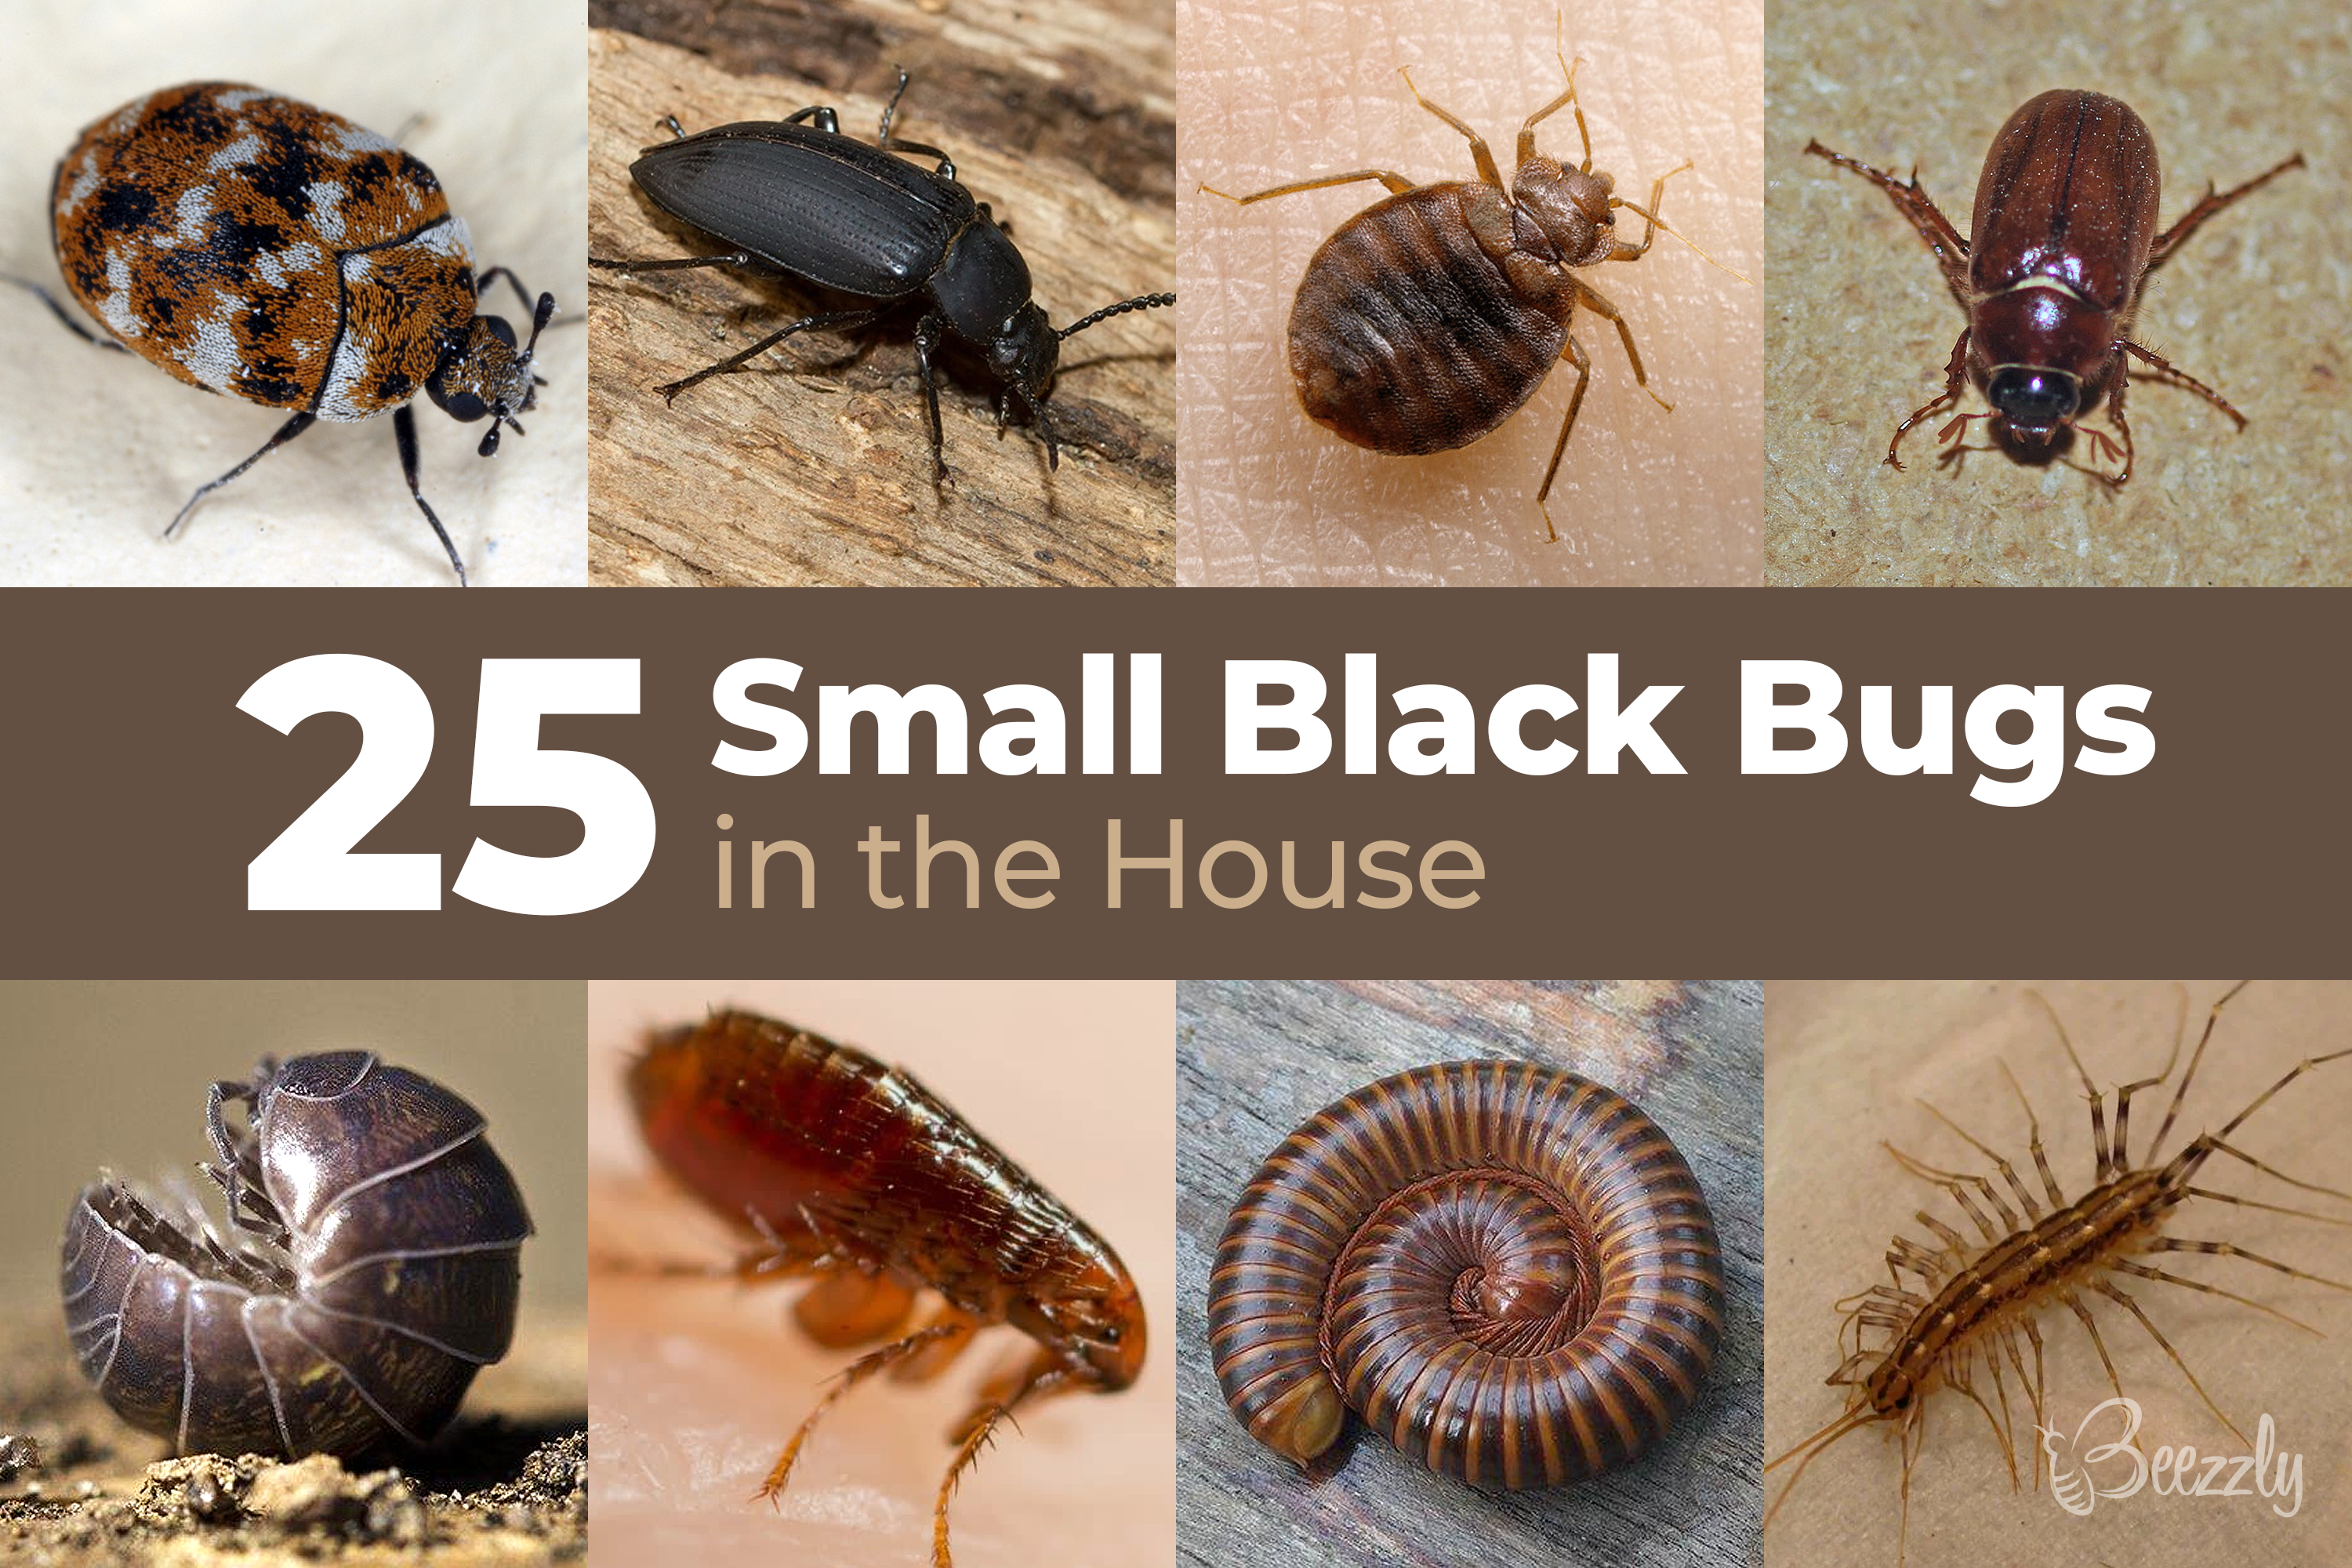 25 Small Black Bugs In The House, Tiny Black Bugs In My Kitchen Cupboard